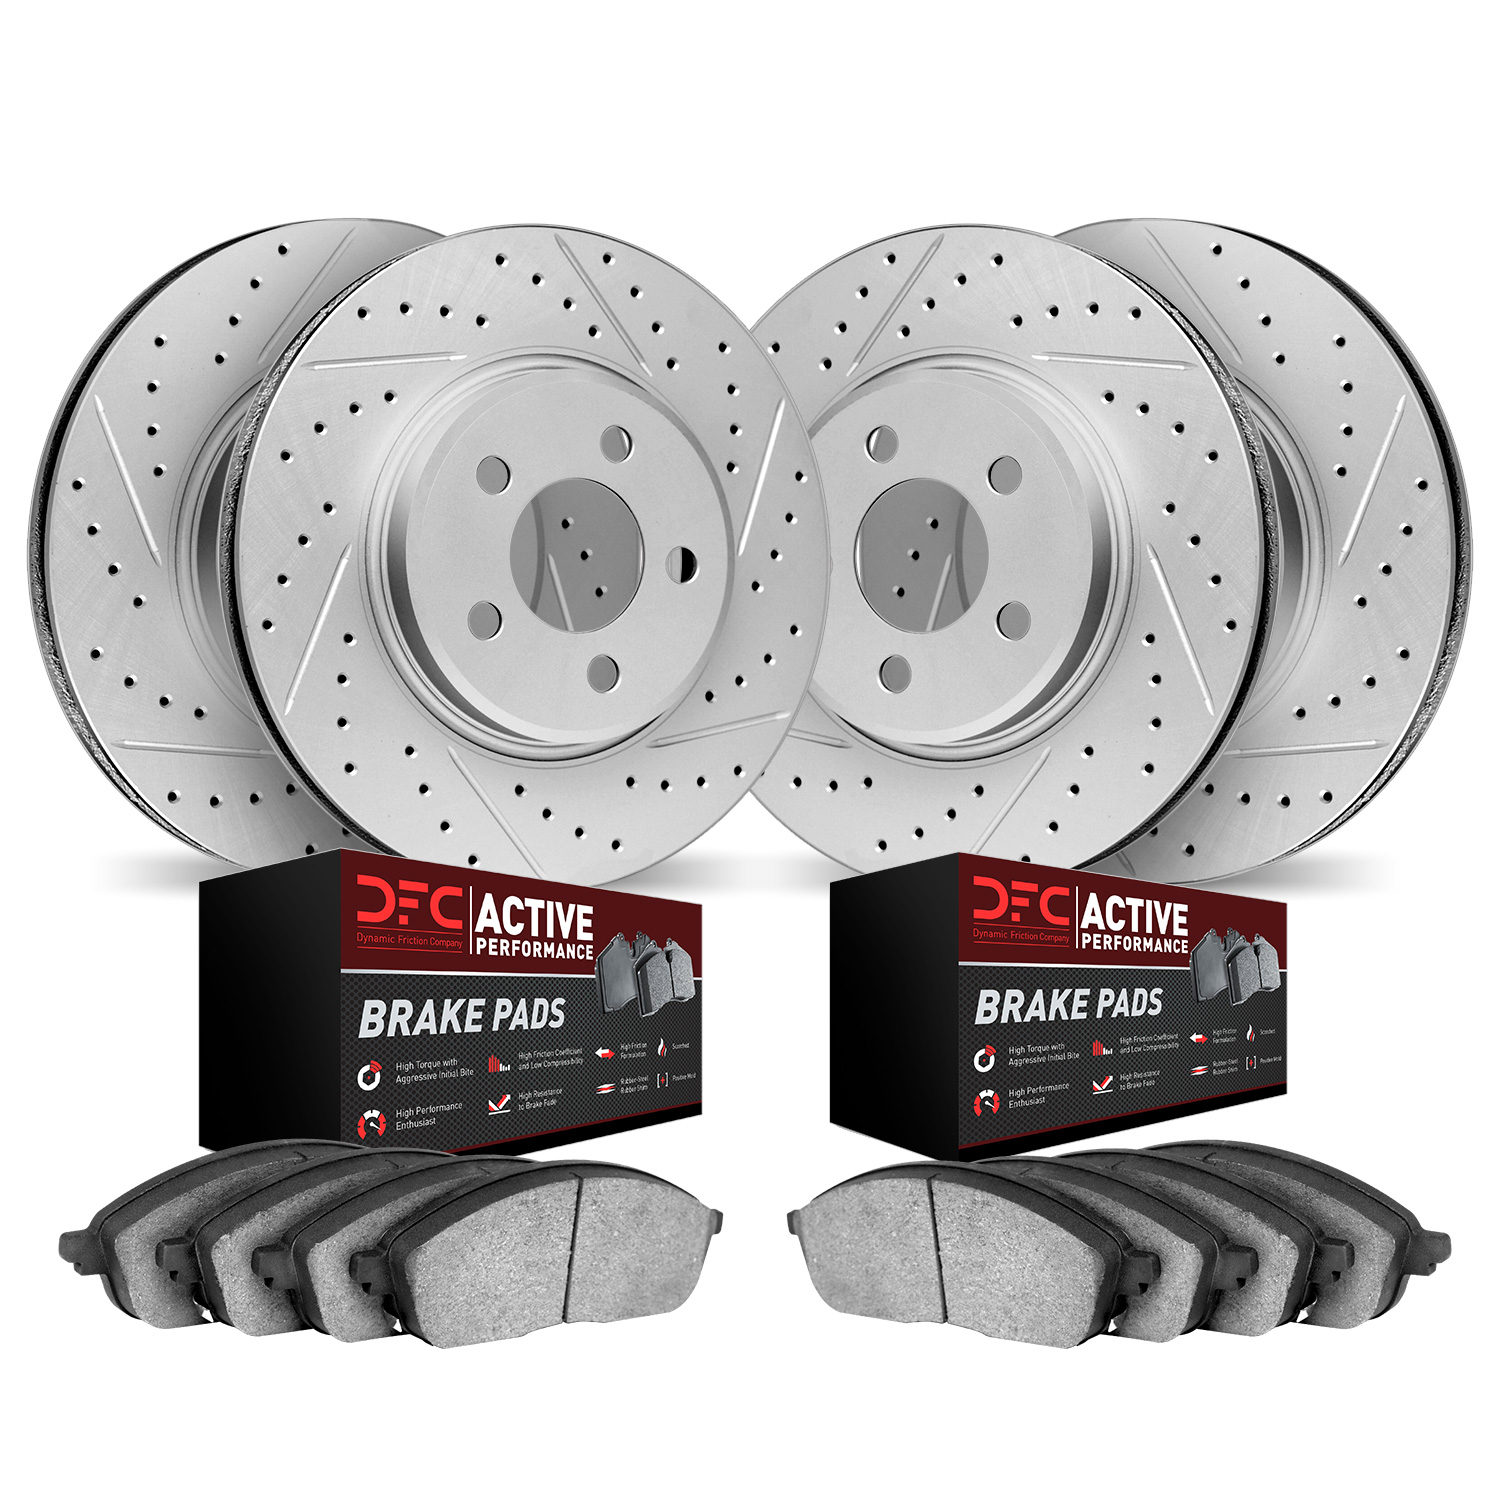 2704-31099 Geoperformance Drilled/Slotted Brake Rotors with Active Performance Pads Kit, 2013-2020 BMW, Position: Front and Rear